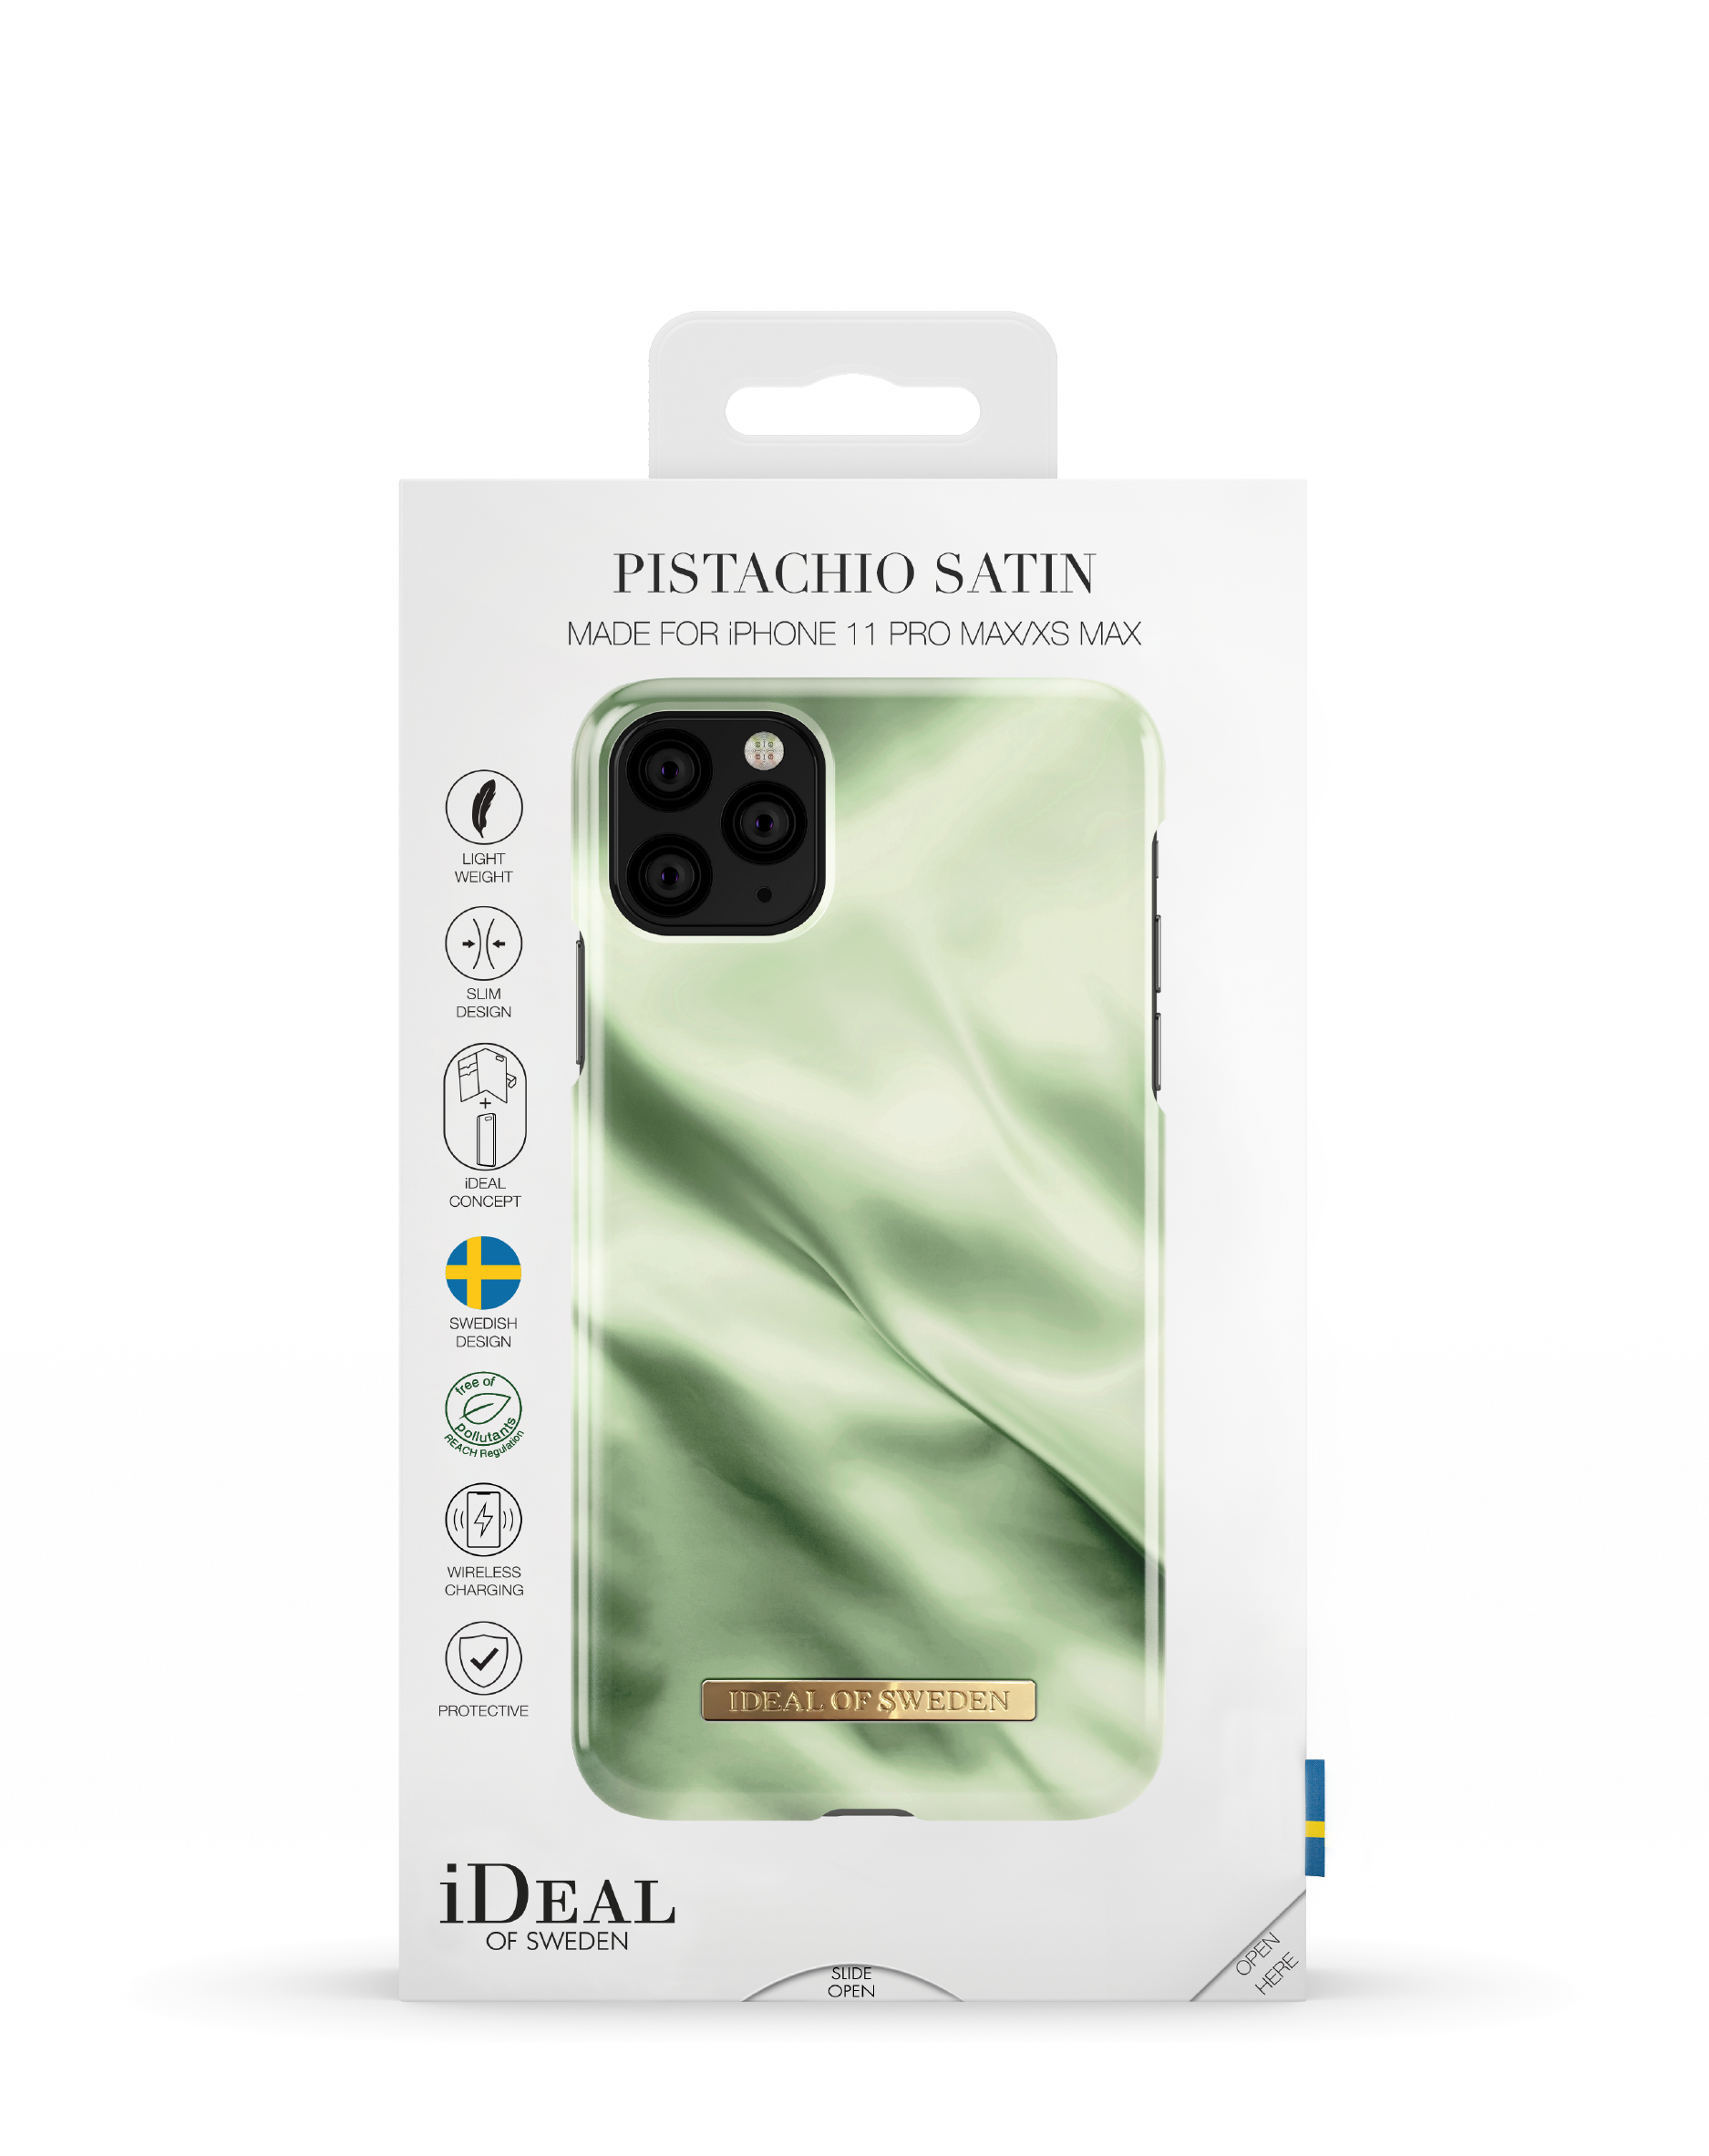 Apple Pistachio Apple, OF 11 SWEDEN XS Apple iPhone Max, Satin iPhone IDFCSC19-I1965-189, Max, Backcover, Pro IDEAL